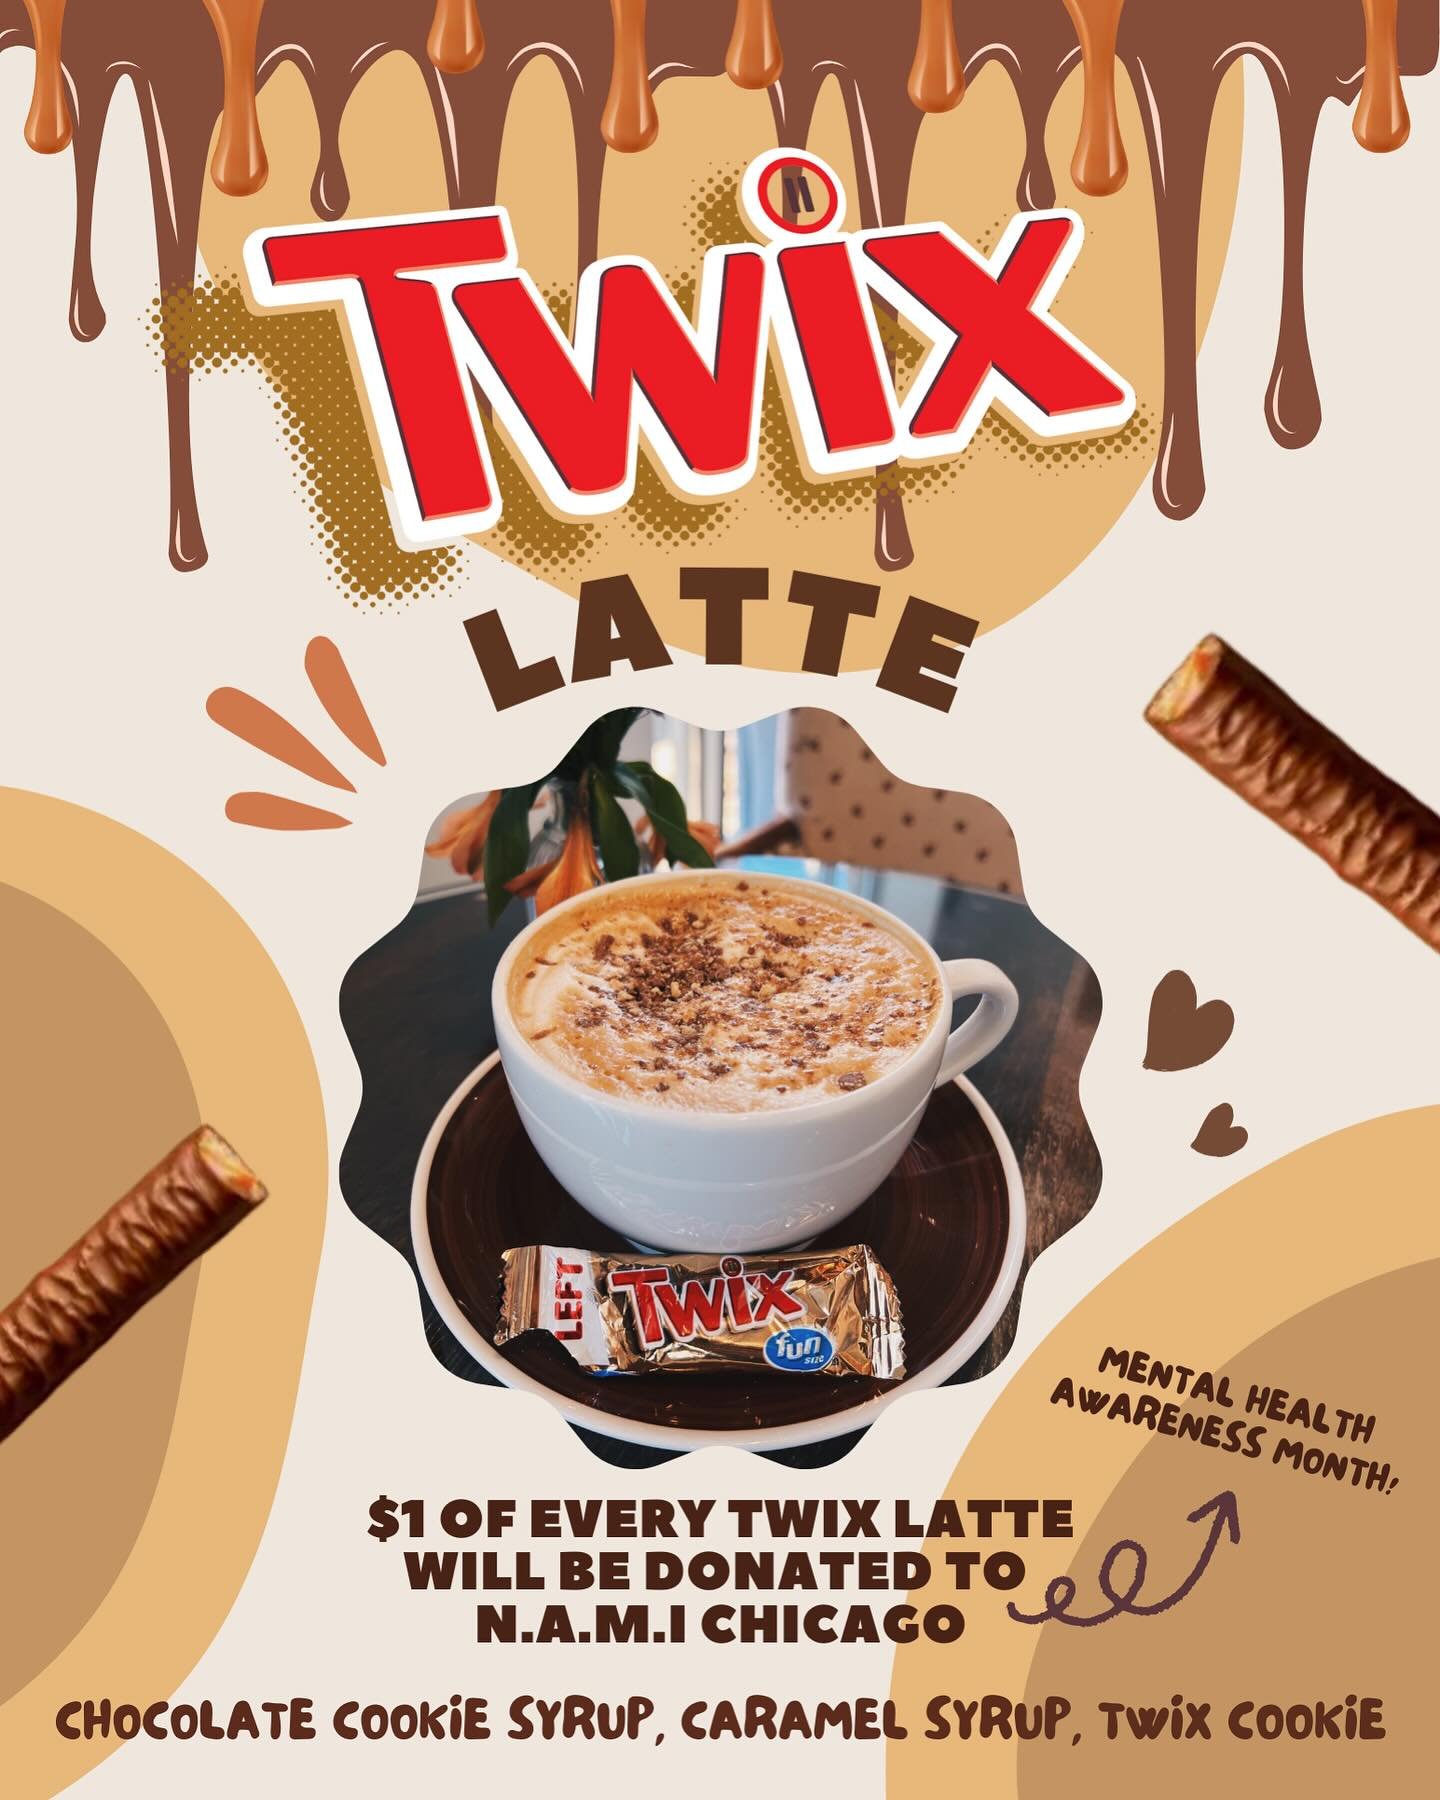 Happy May! 🌻💐

This month&rsquo;s Donation creation is our &lsquo;Twix Latte&rsquo;! Made with chocolate cookie syrup, caramel syrup, and topped with crushed Twix bars! 🍪🍫

May is Mental Health awareness month! $1 of every Twix latte sold will be